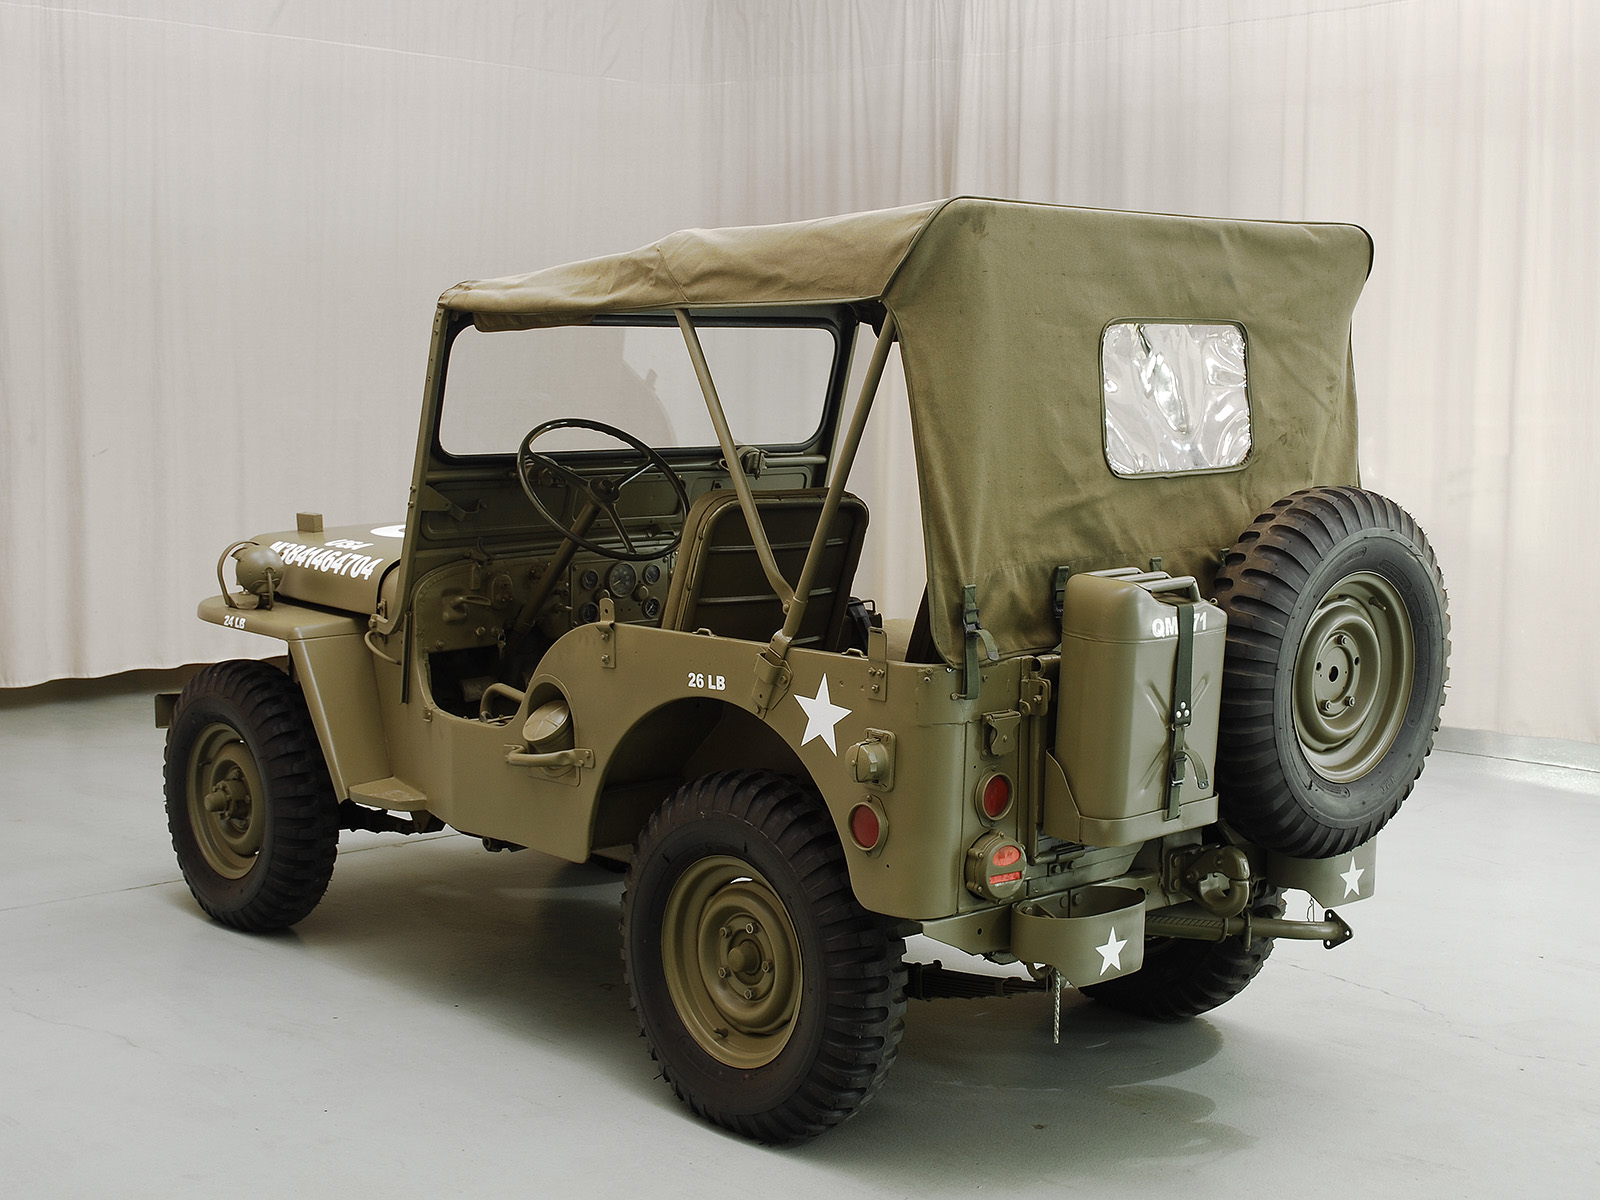 1959 willys-overland m38a1 1/4 ton